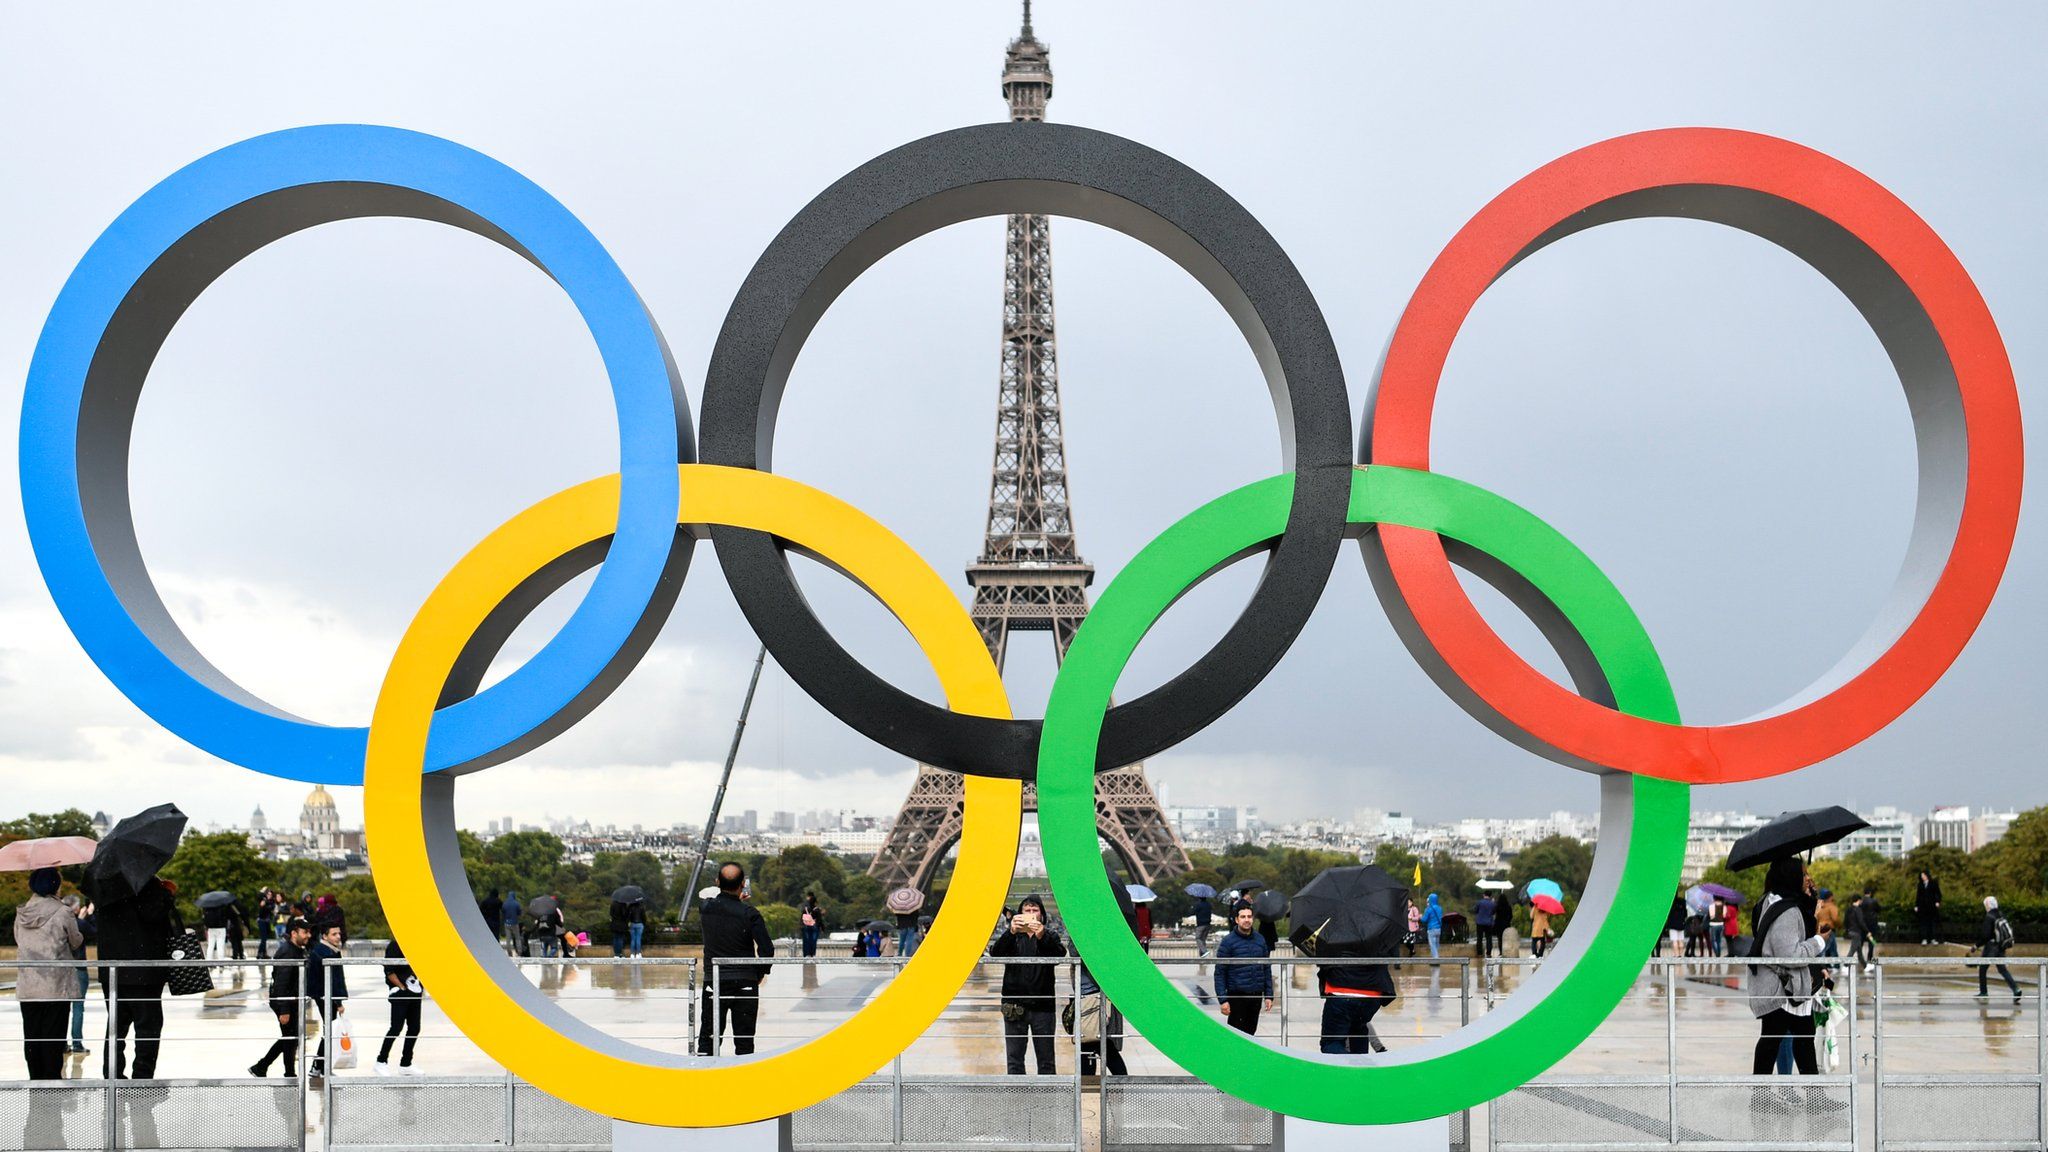 Paris 2024: How is France preparing for the Olympics and Paralympics? - BBC News